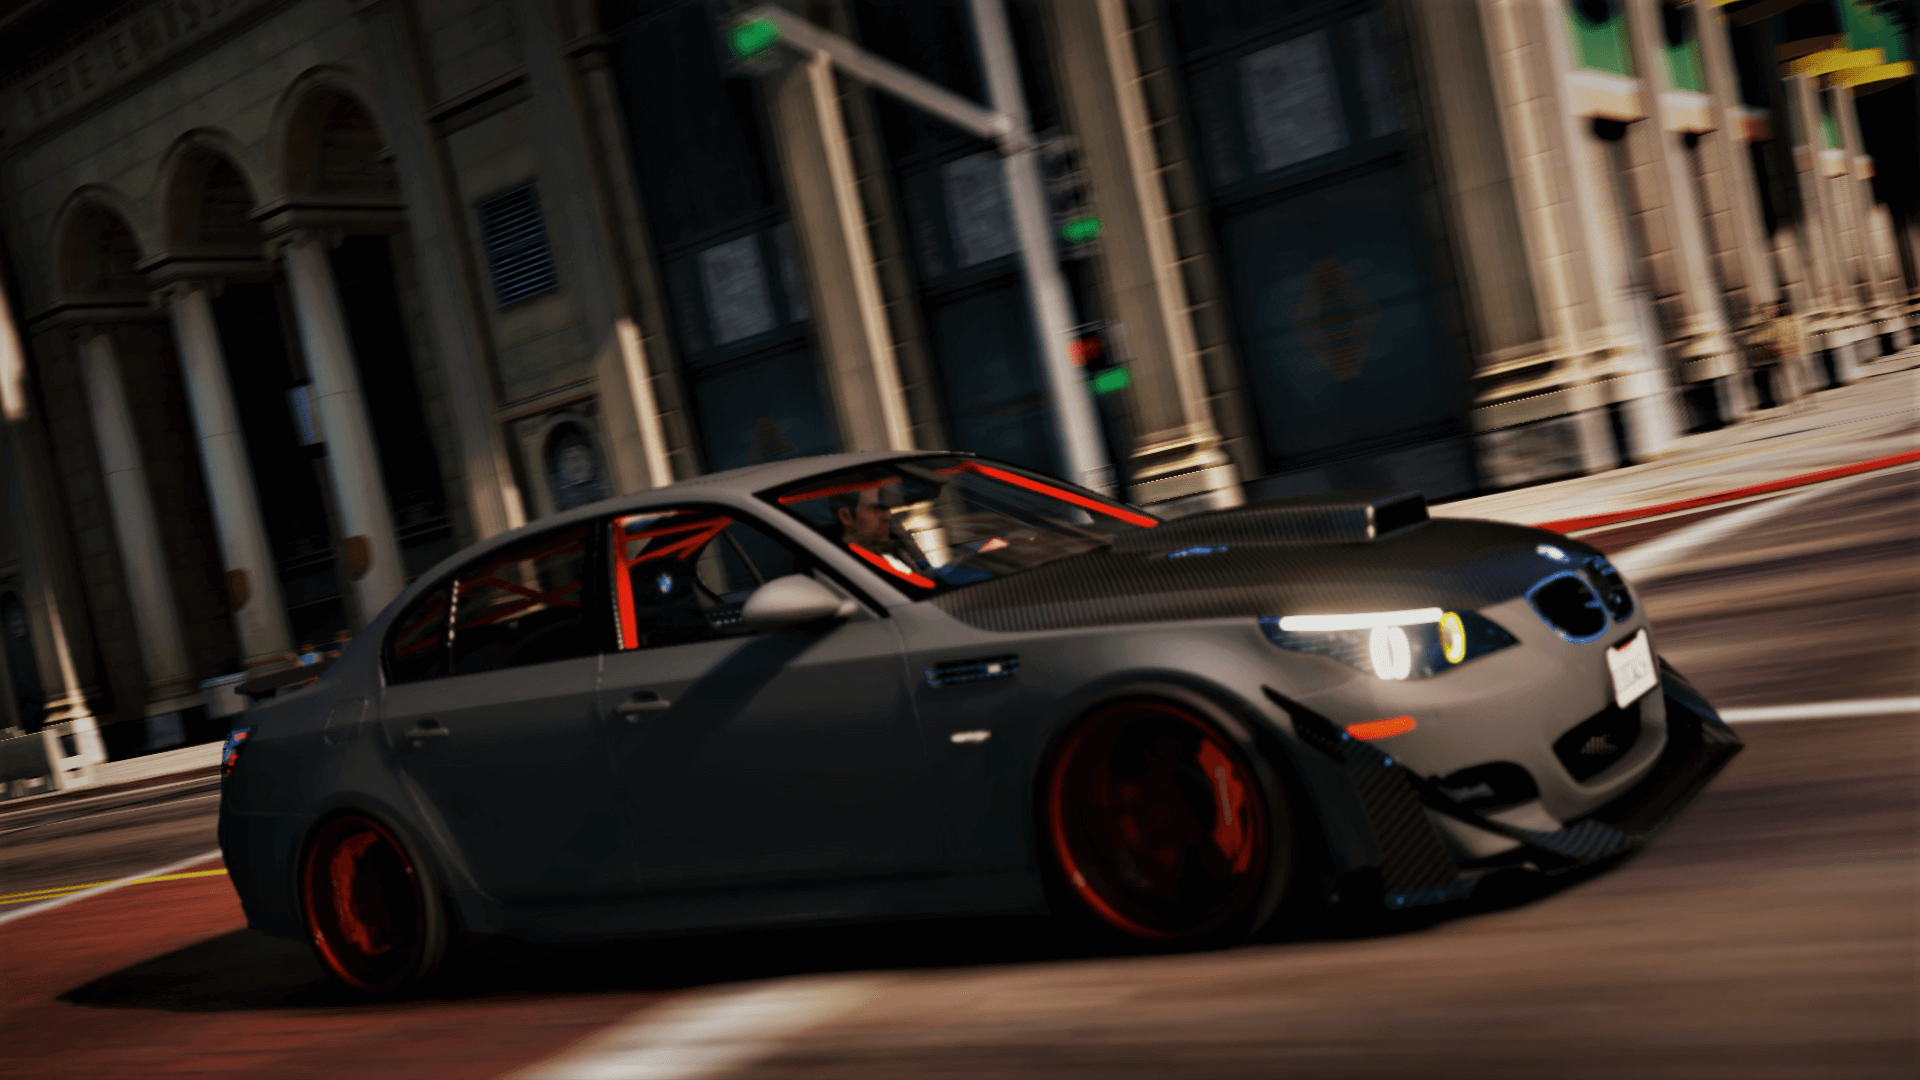 https://img.gta5-mods.com/q75/images/bmw-m5-e60-crazy-exterior-add-on-tuning/6cb218-6.png